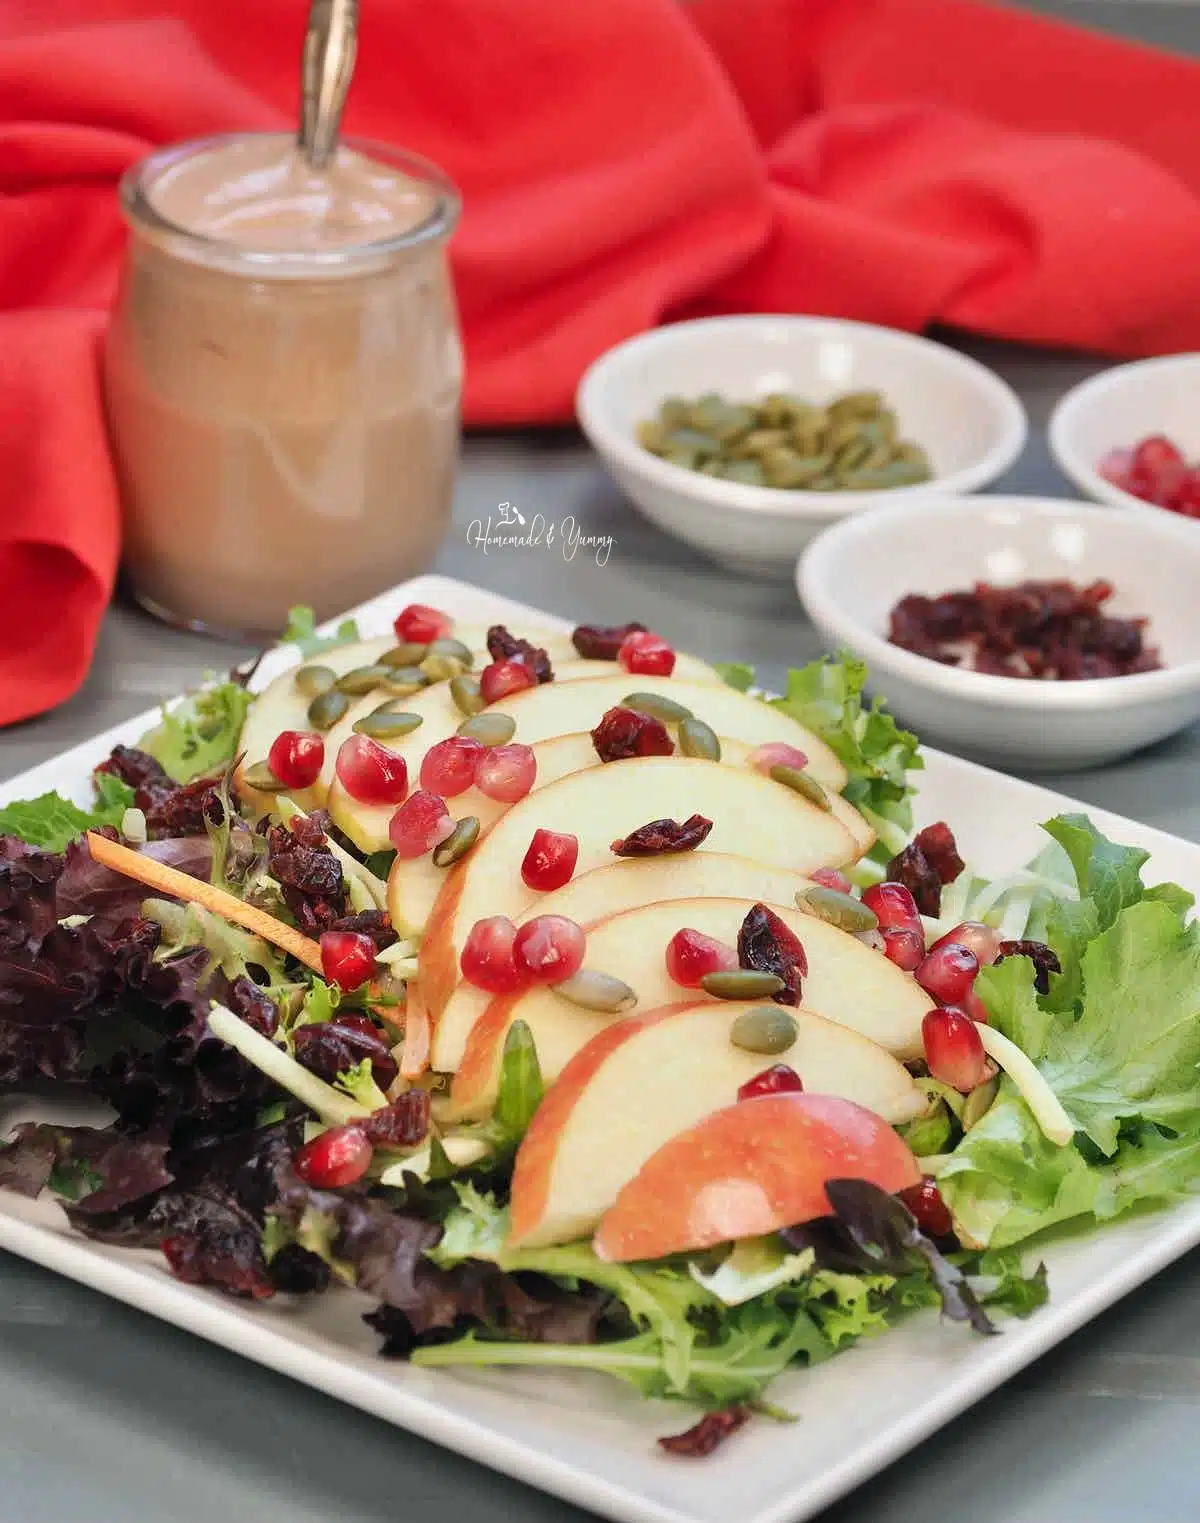 Fall salad with apples, pomegranates, cranberries and pumpkin seeds.